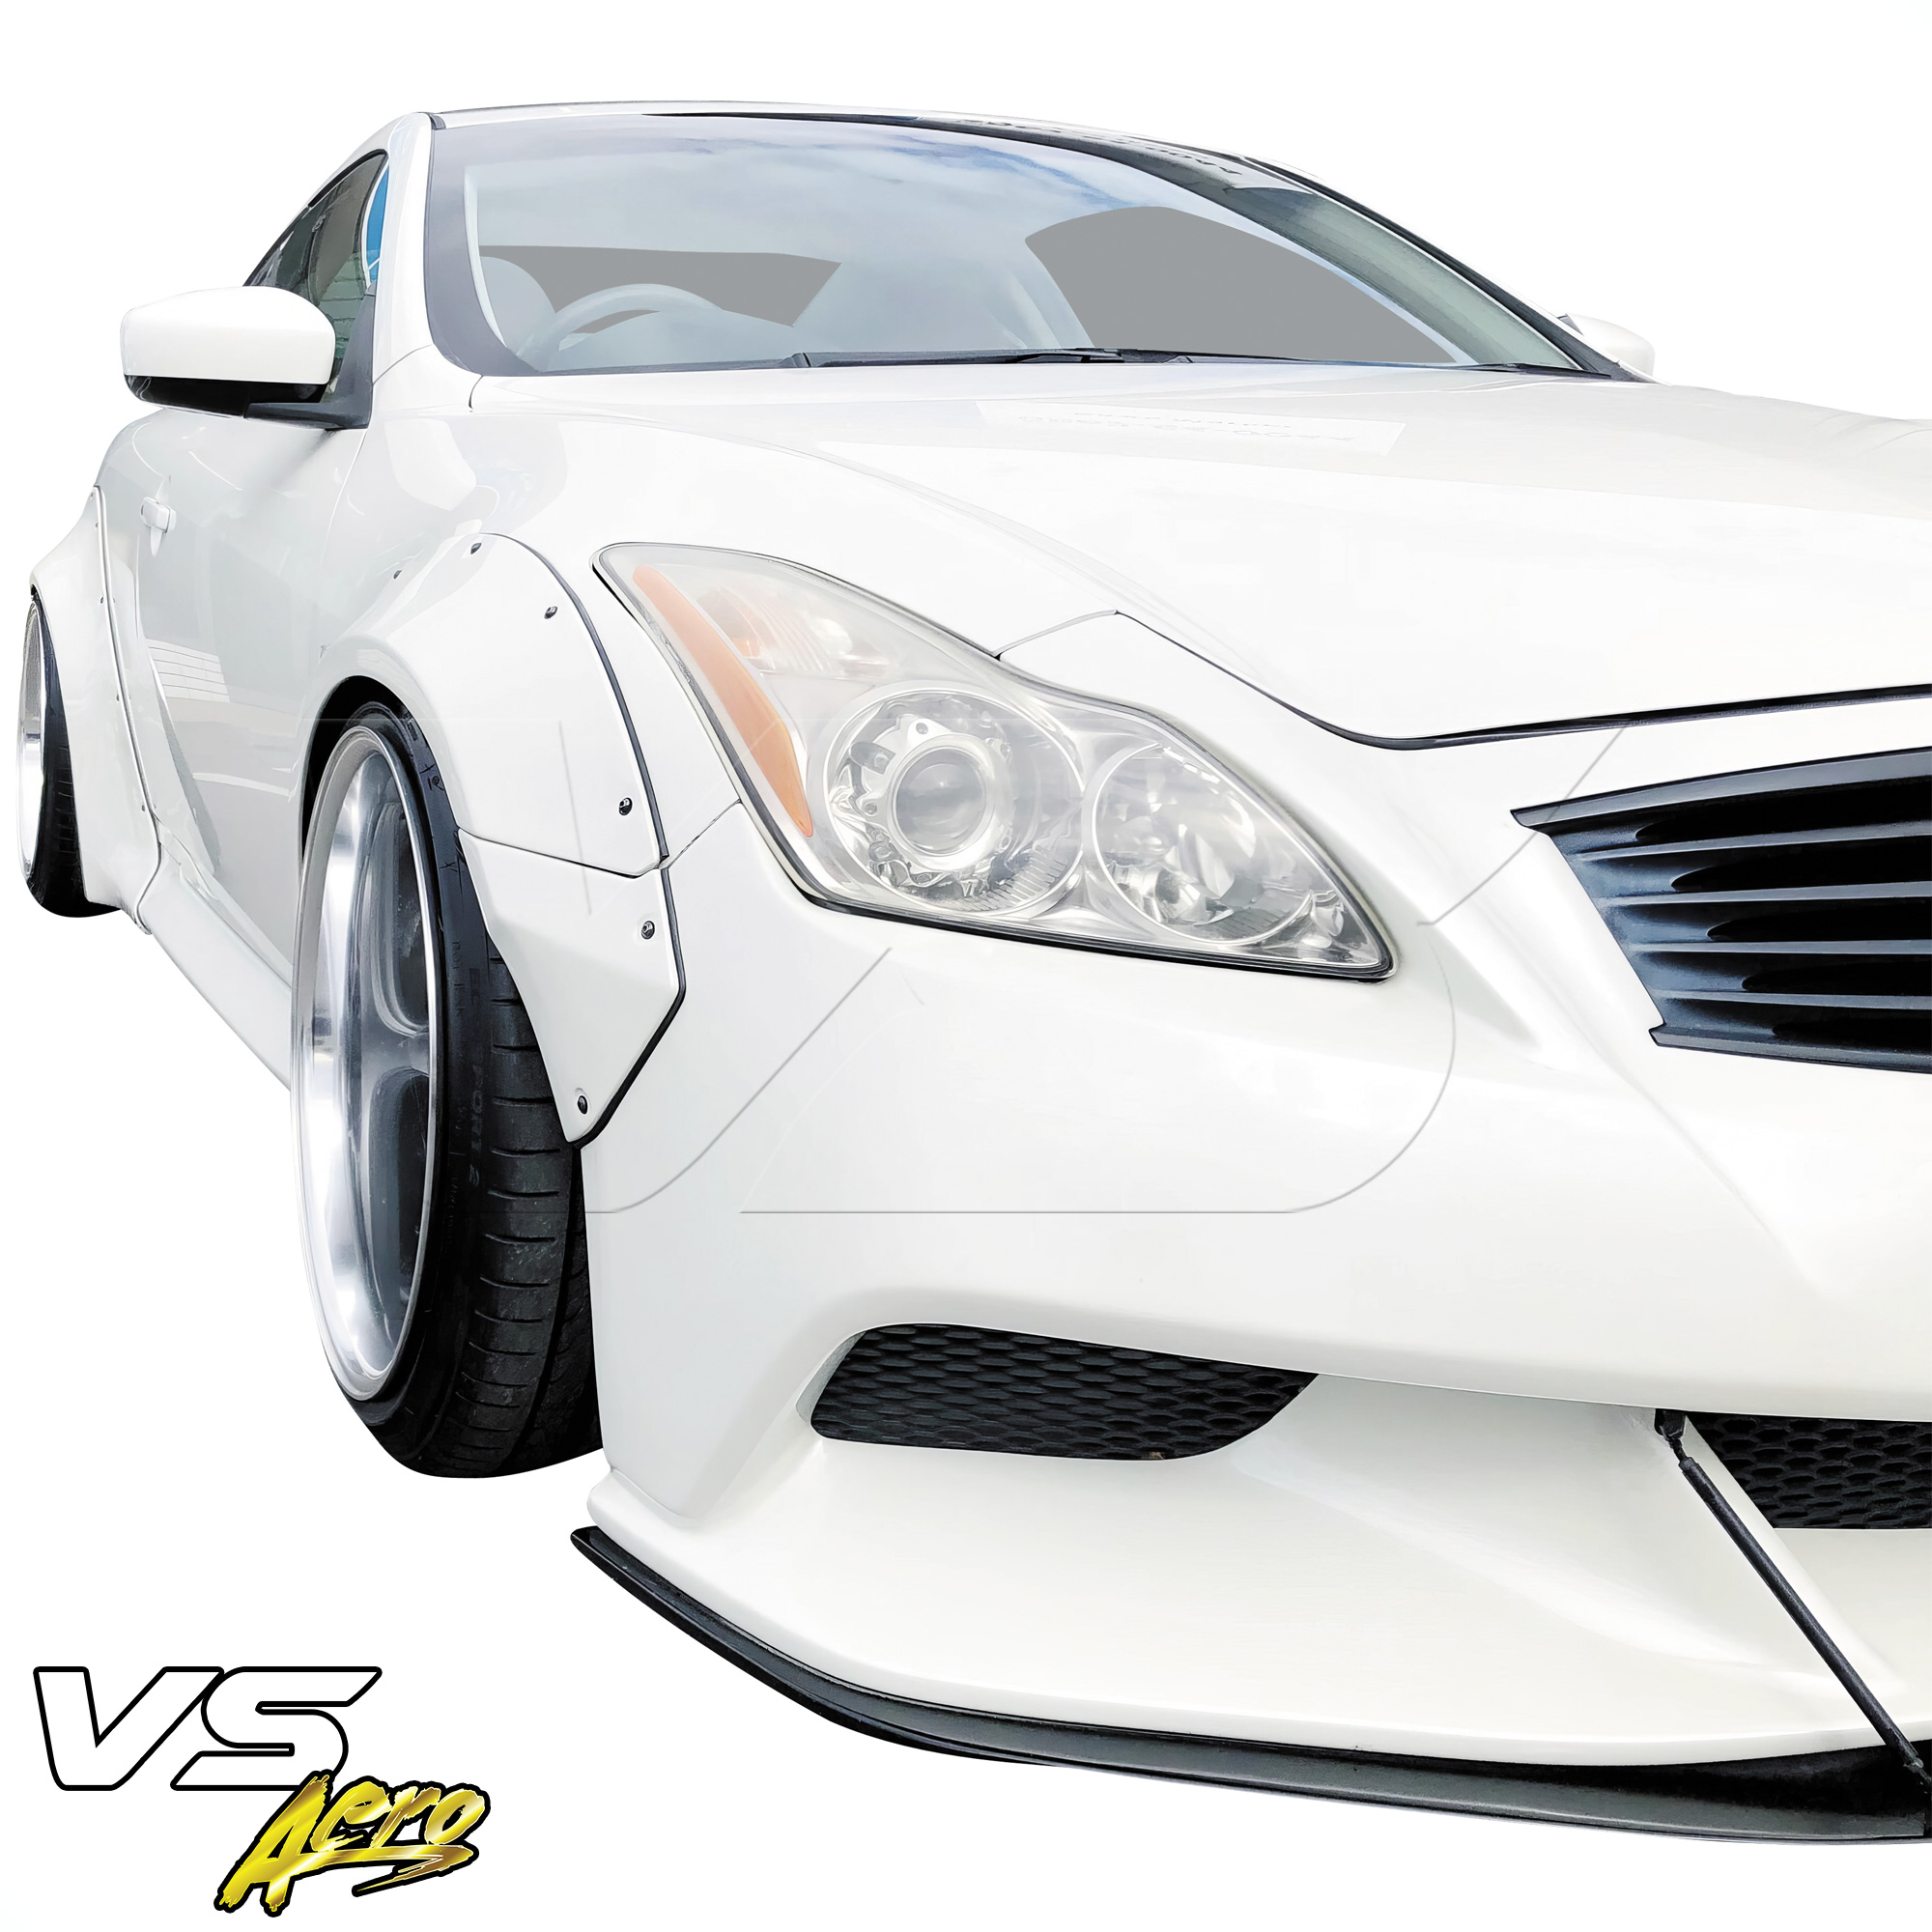 VSaero FRP LBPE Wide Body Fender Flares (front) 4pc > Infiniti G37 Coupe 2008-2015 > 2dr Coupe - Image 29